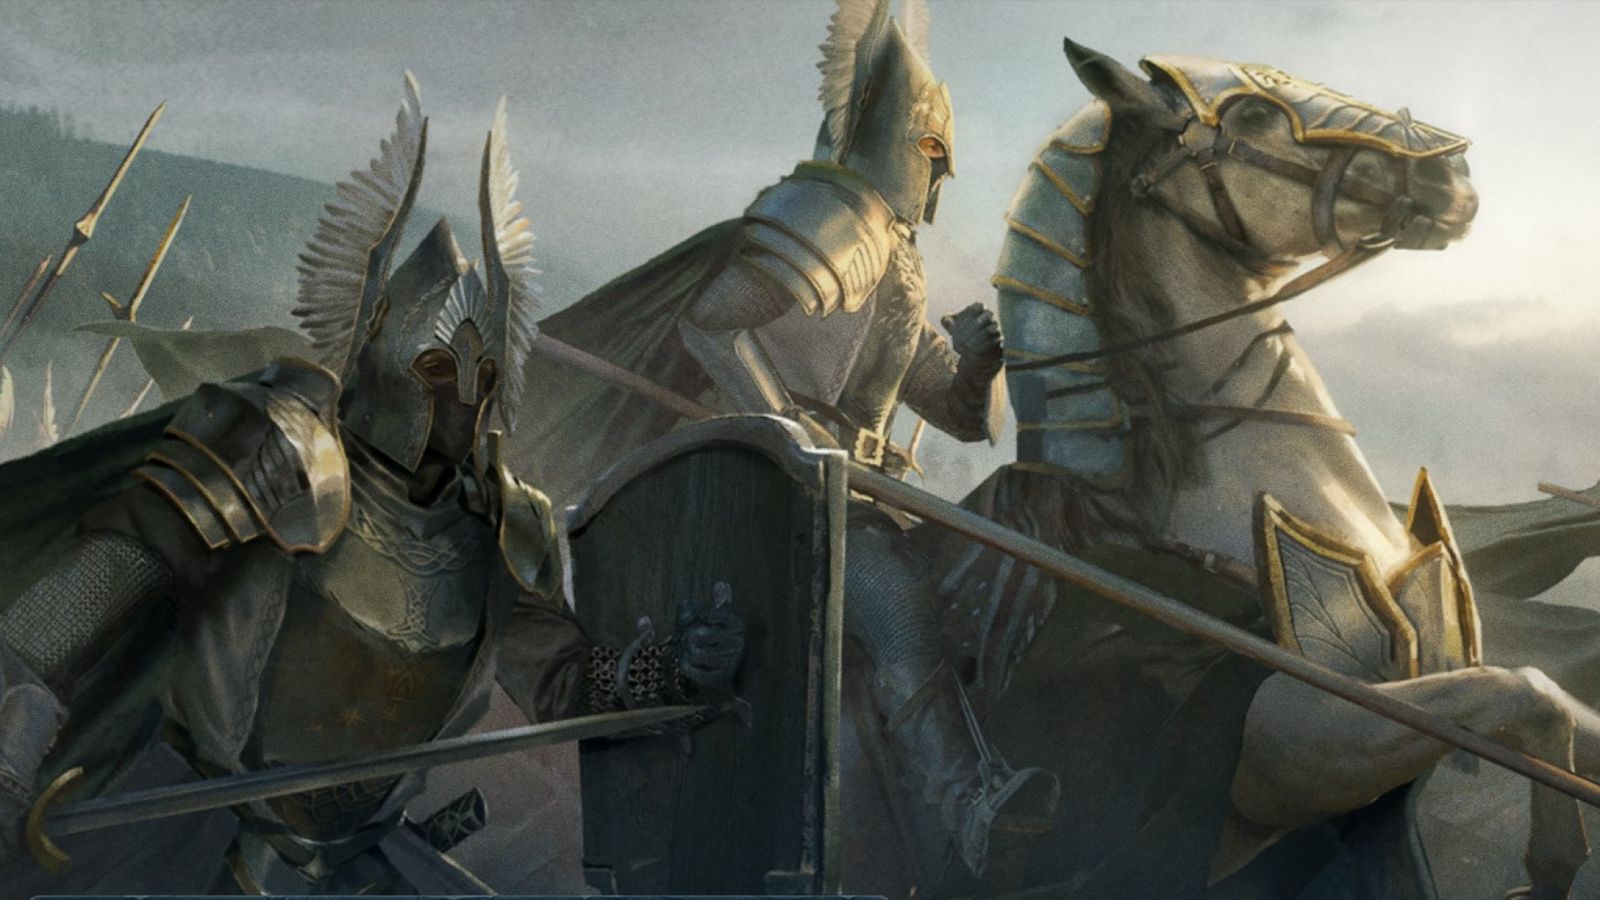 Image of soldiers in The Lord of the Rings: Rise to War.